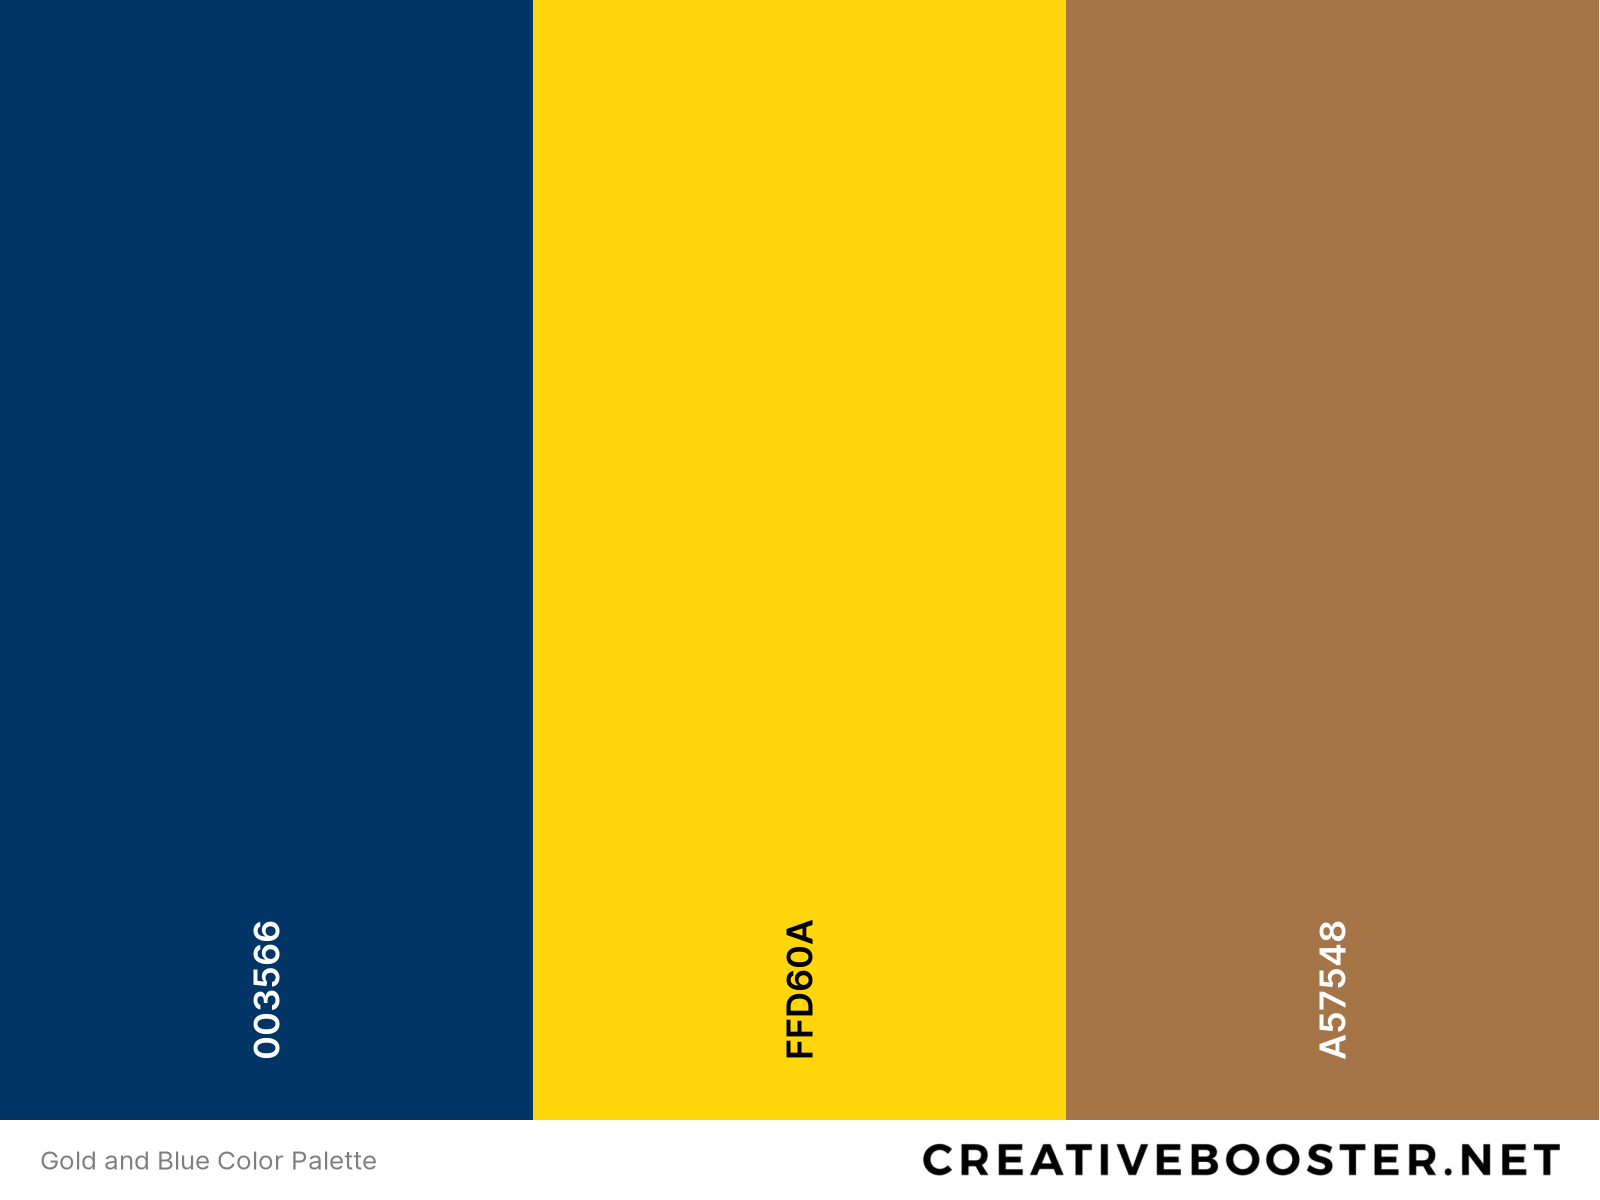 Gold and Blue Color Palette